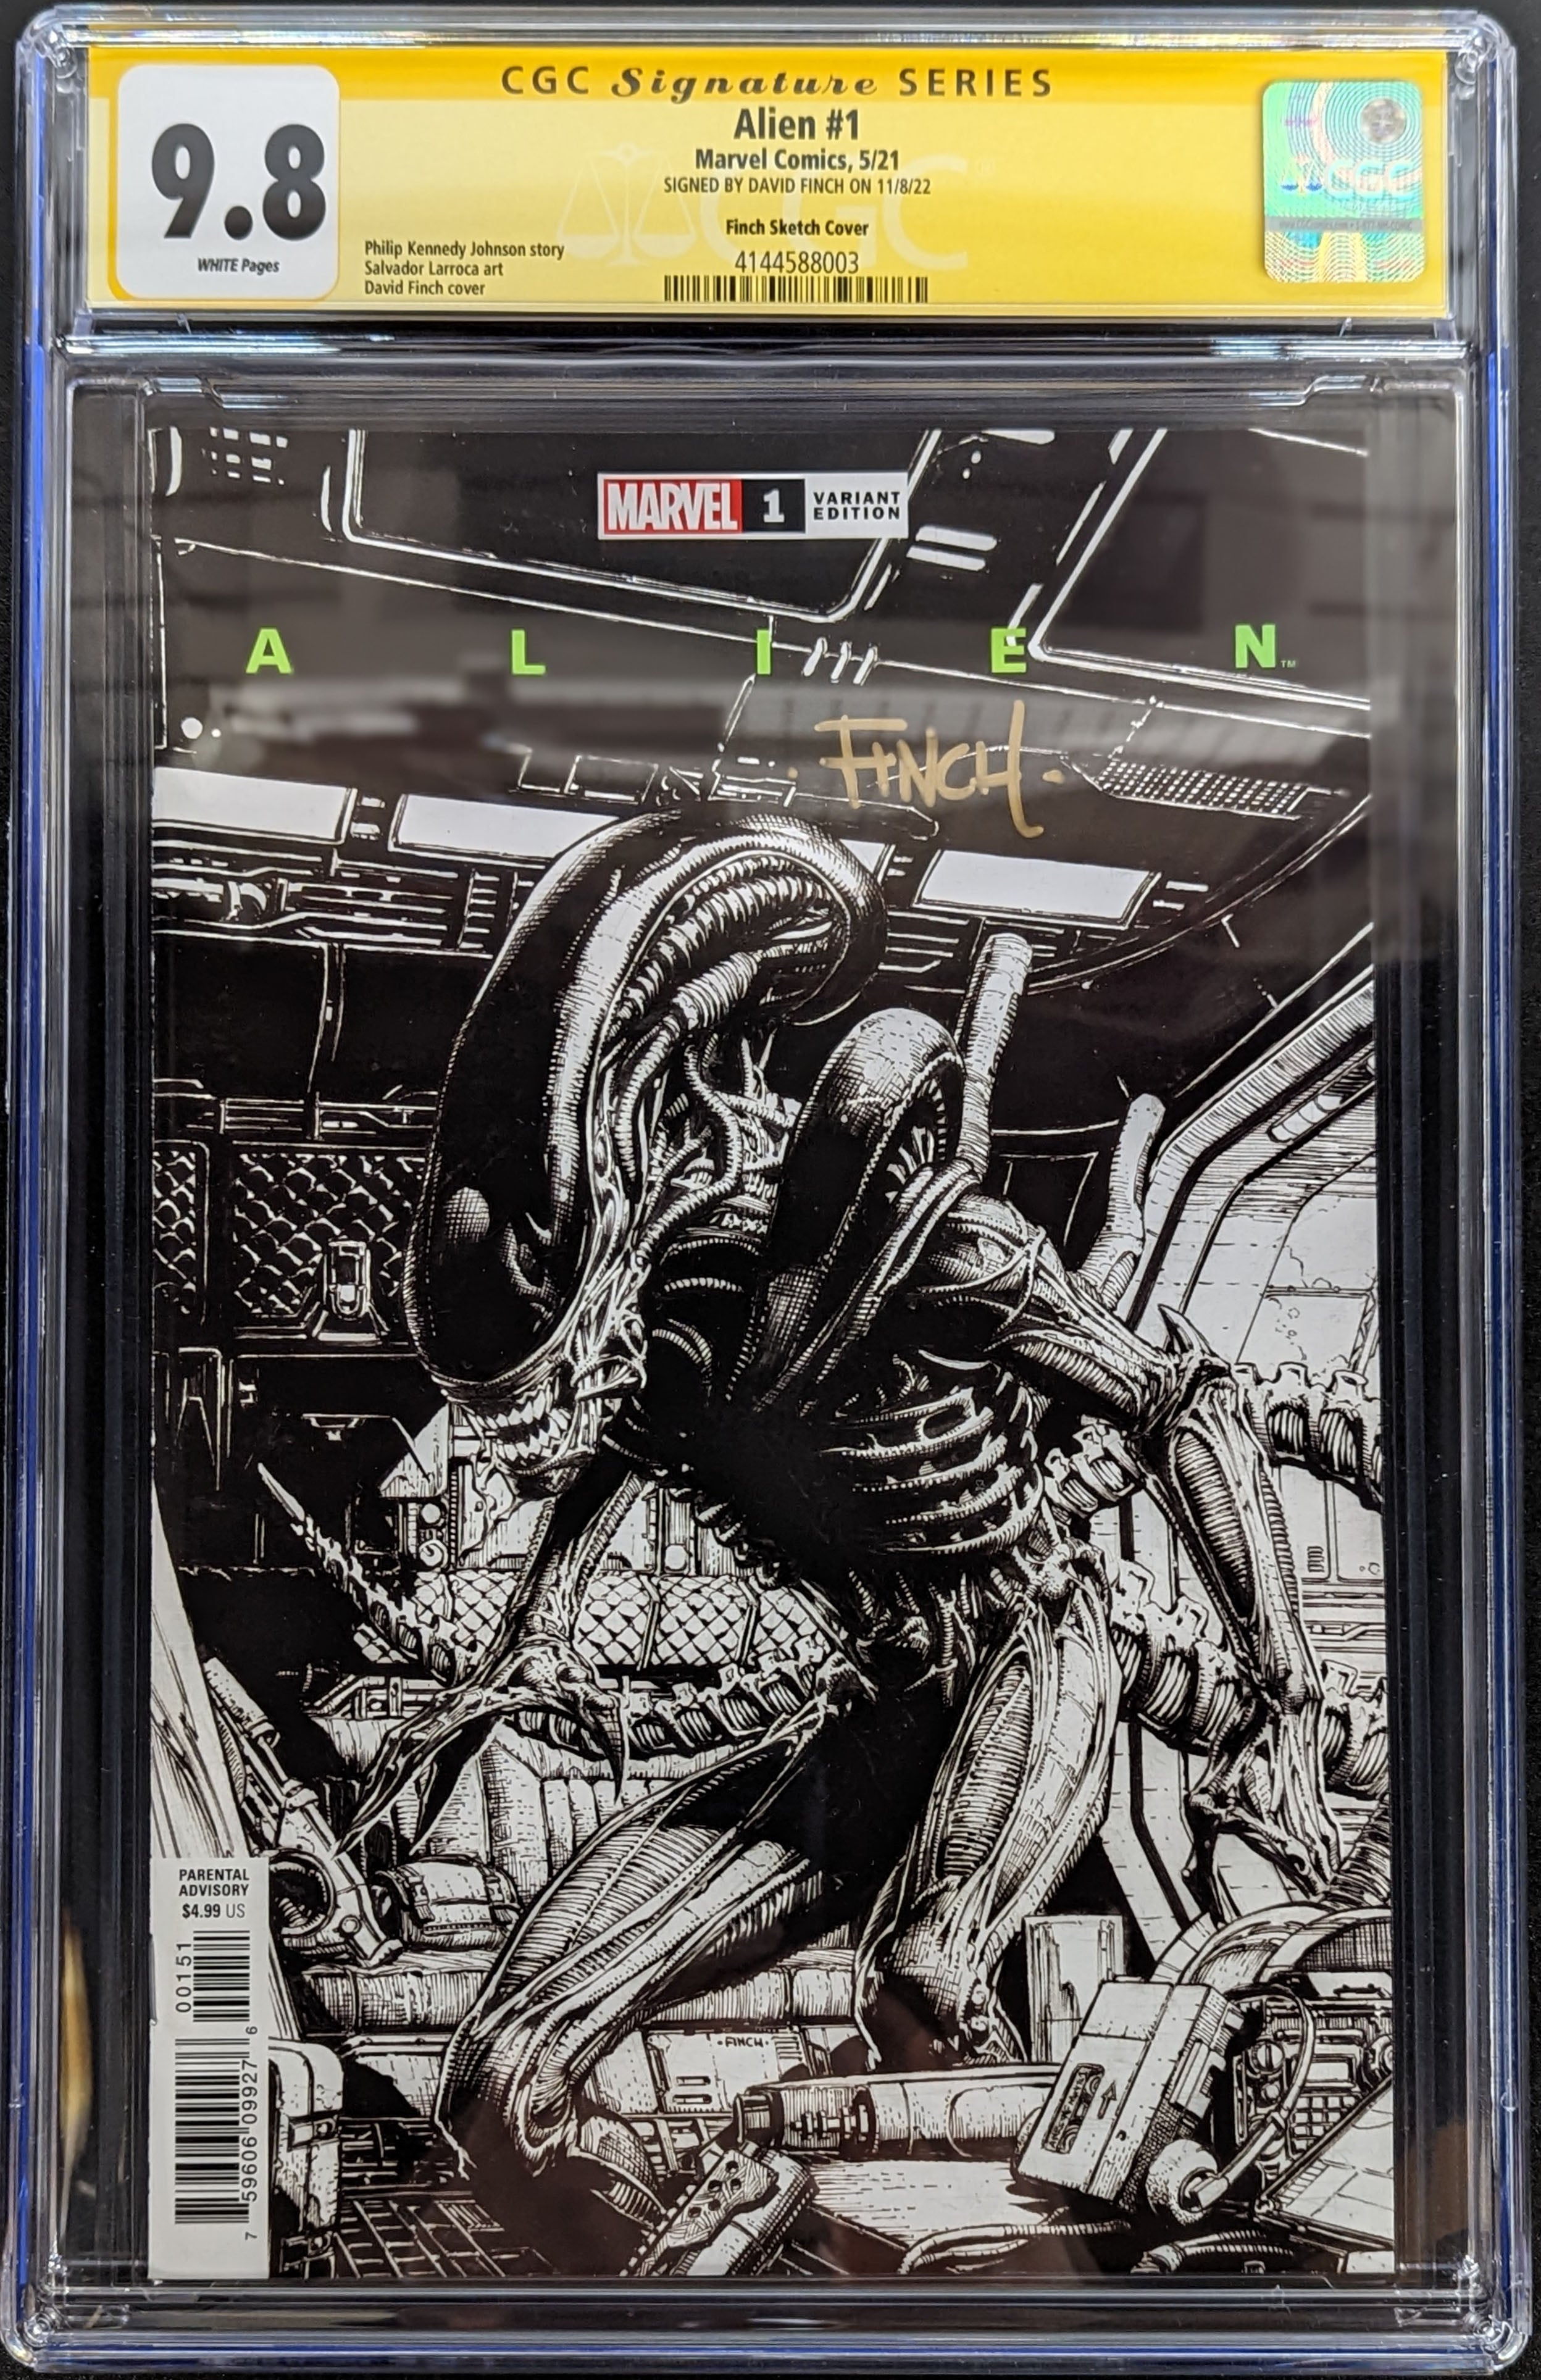 ALIEN #1 Sketch Cover Variant Graded CGC 9.8 Signed by David Finch